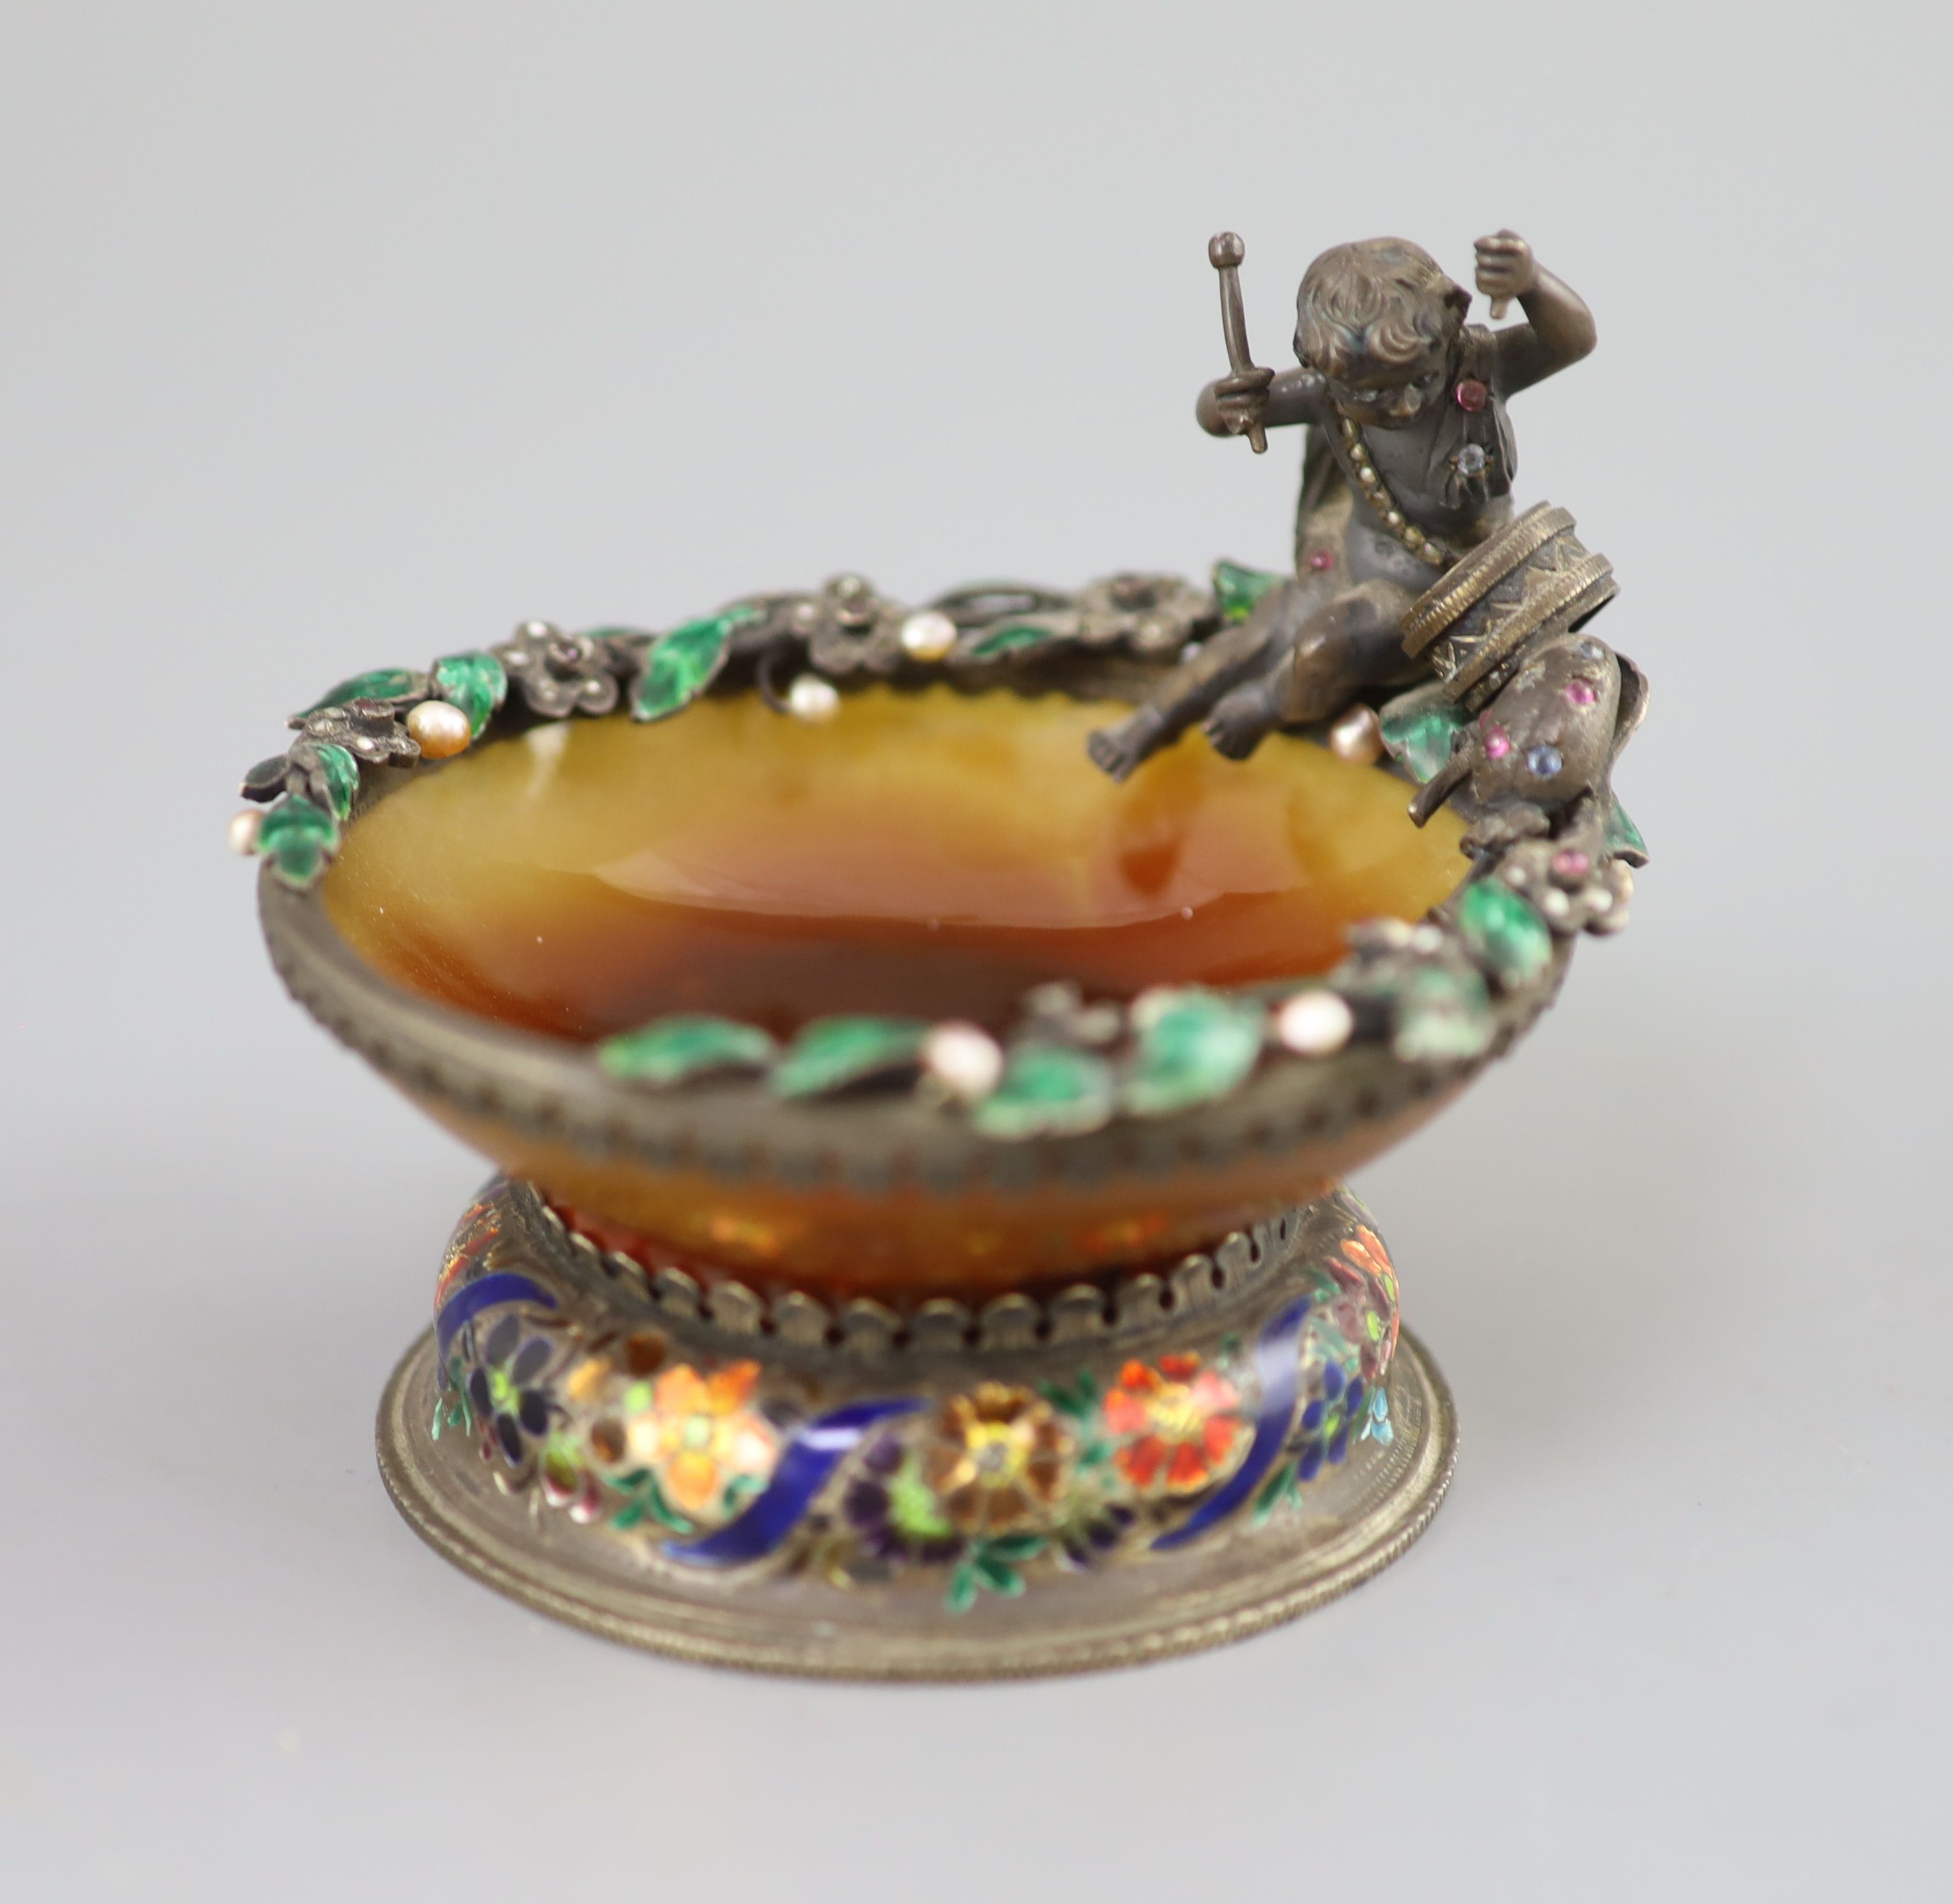 A 19th century Austro-Hungarian silver, green enamel and gem set mounted agate table salt